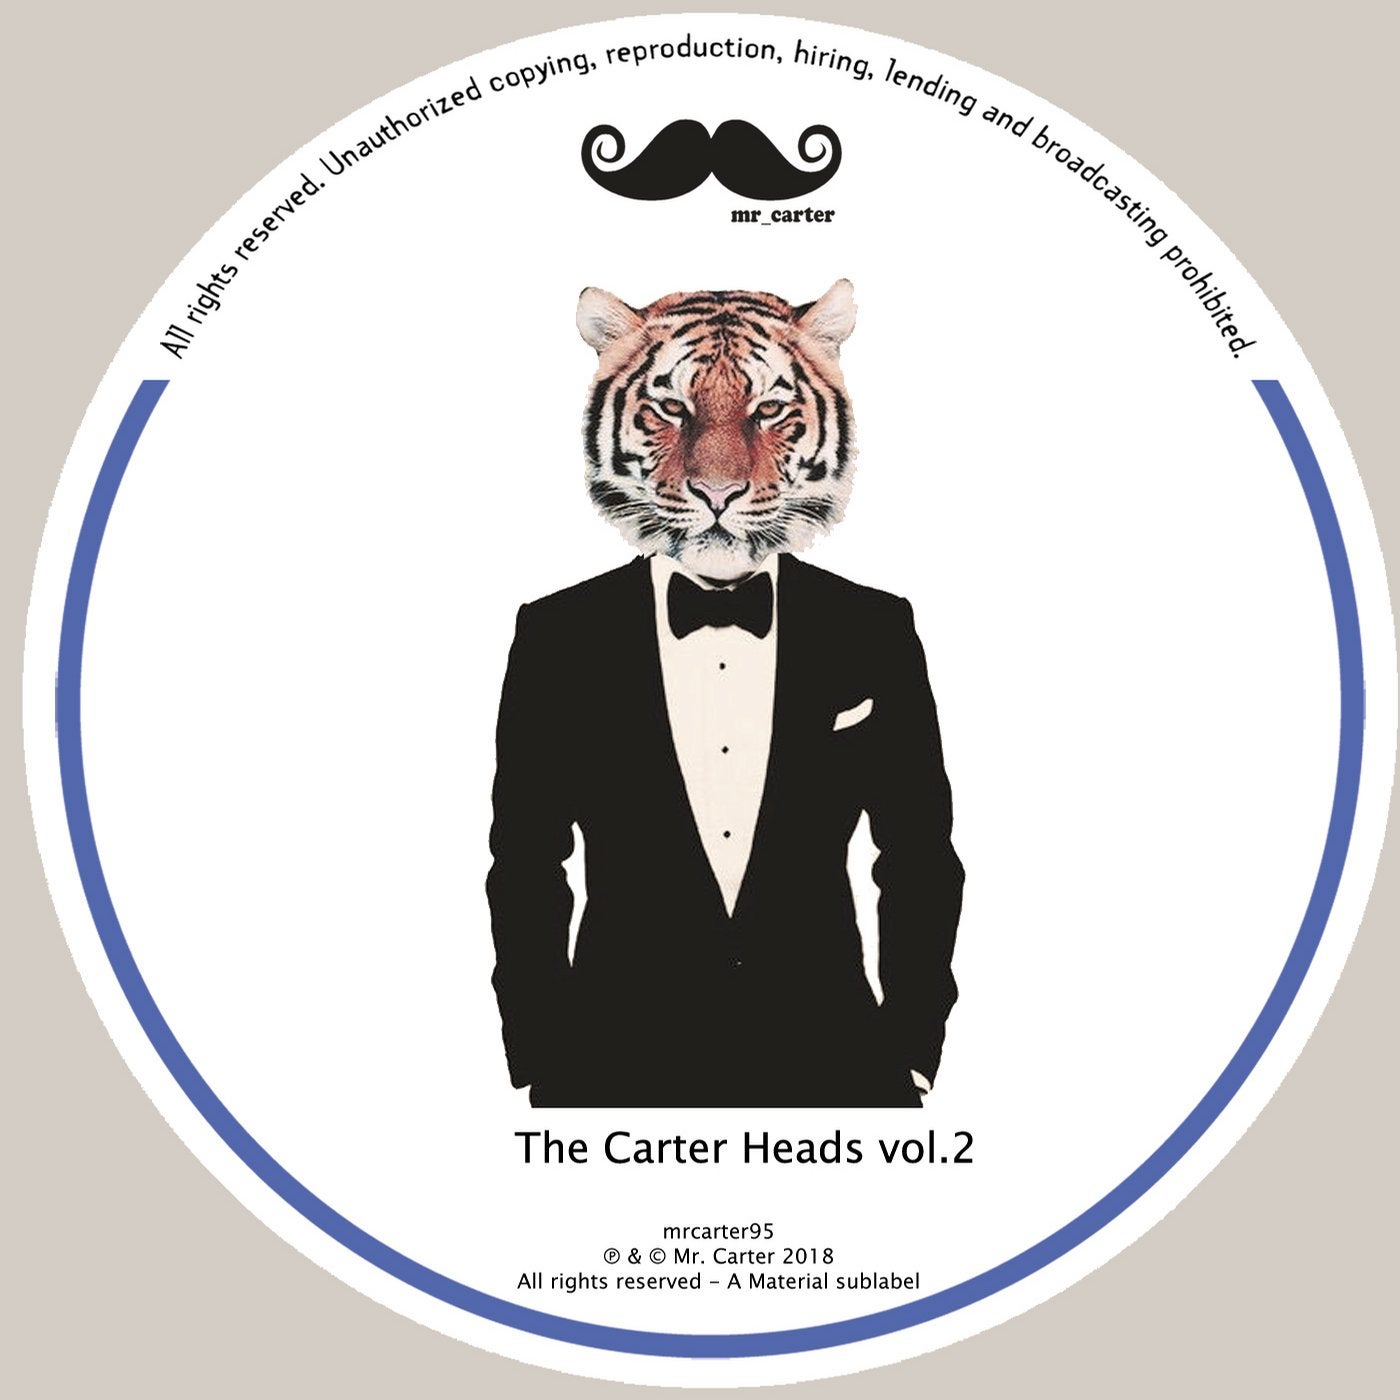 The Carter Heads Vol.2 EP